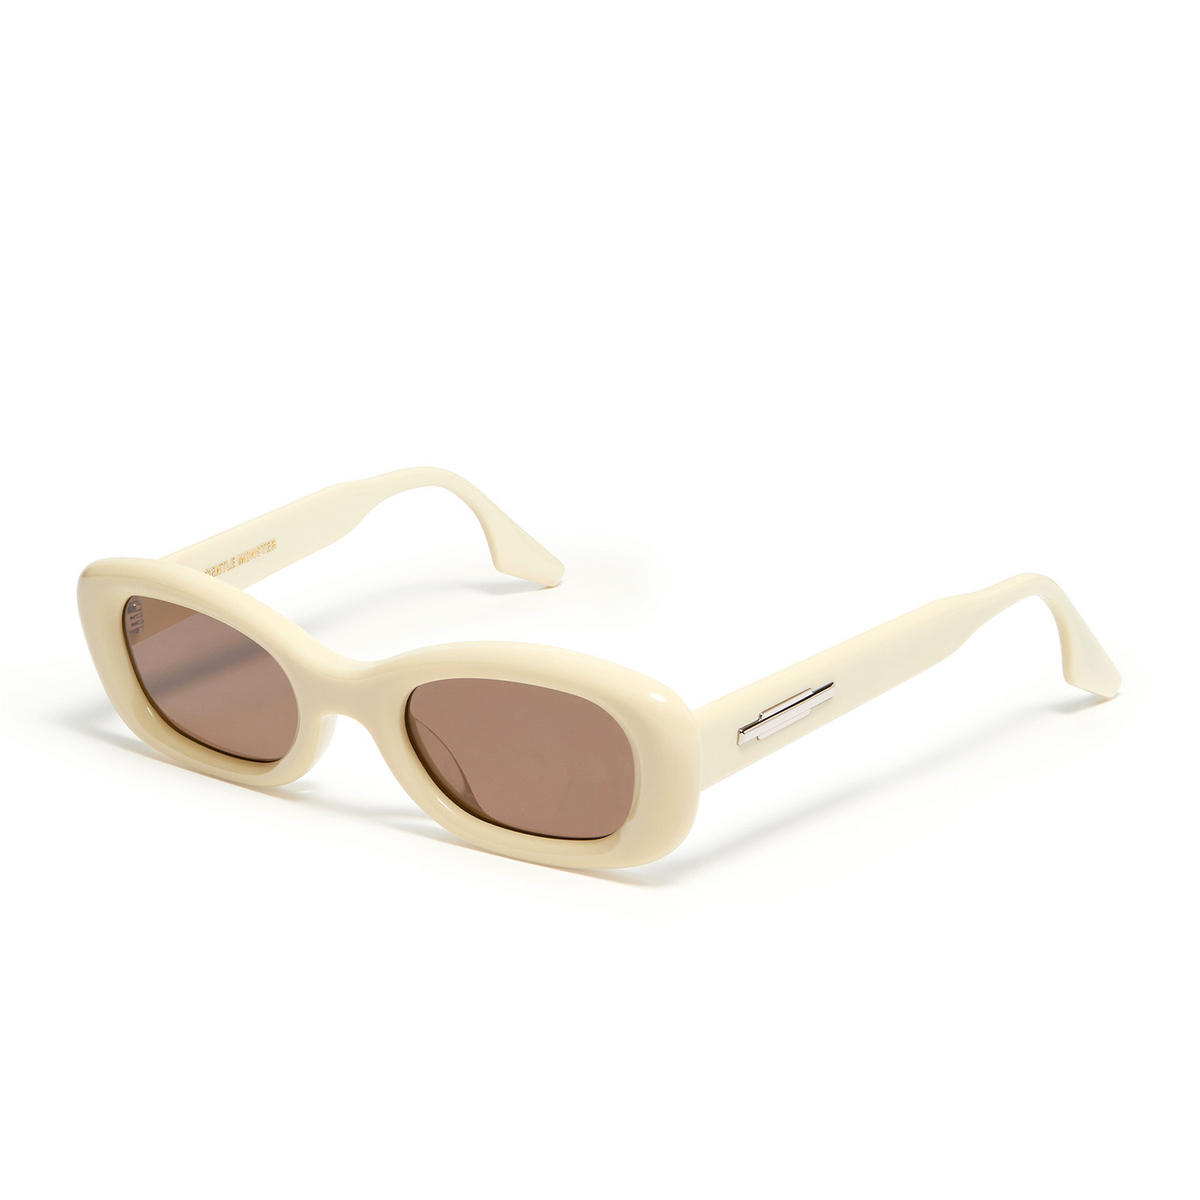 Gentle Monster® Oval Sunglasses: Tambu color Yellow Y4 - three-quarters view.